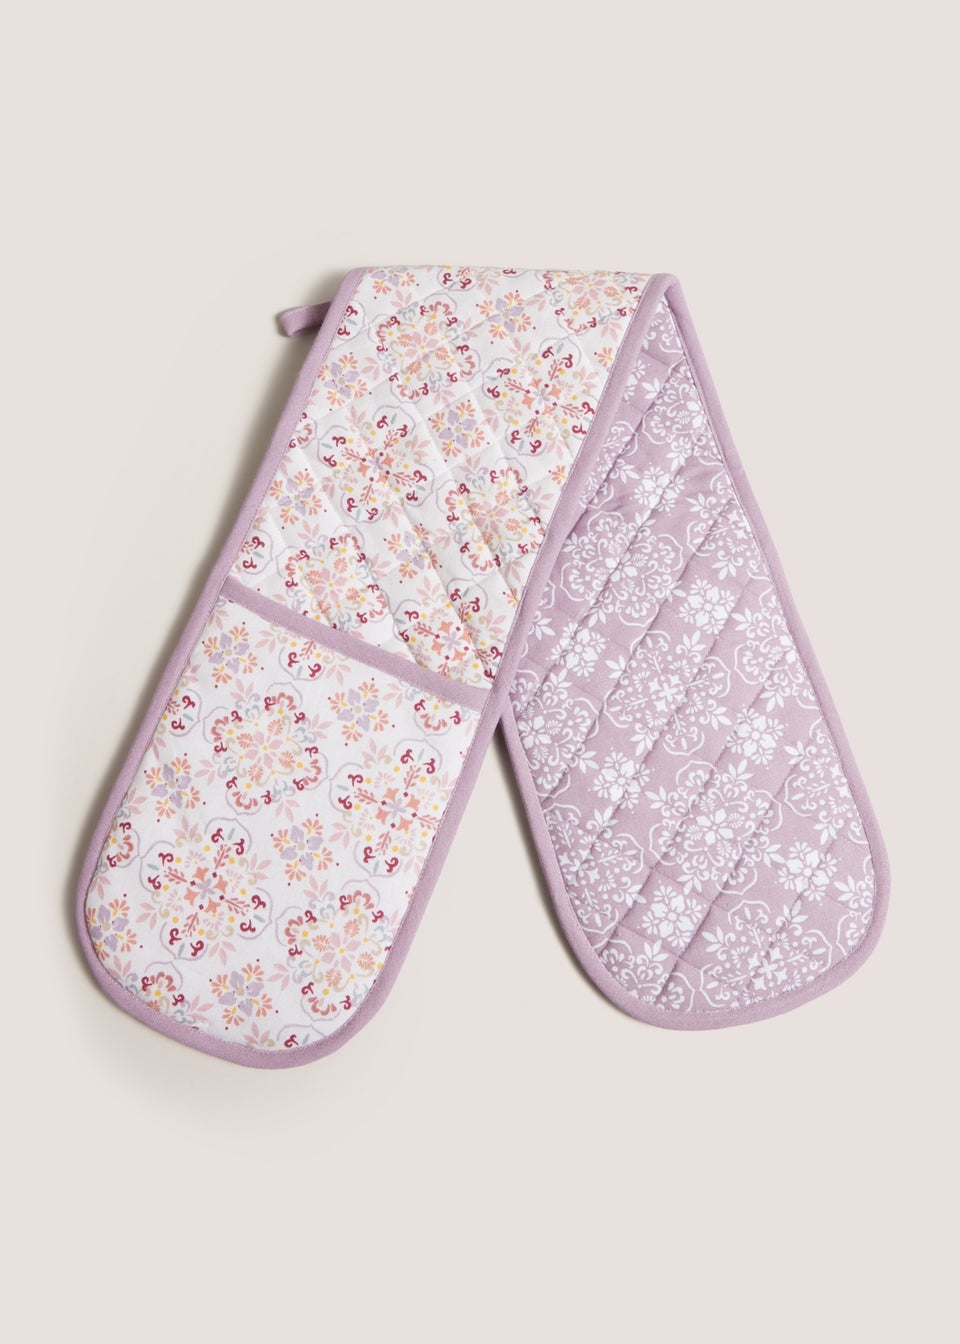 Pink Patterned Oven Mitts (19x90cm)